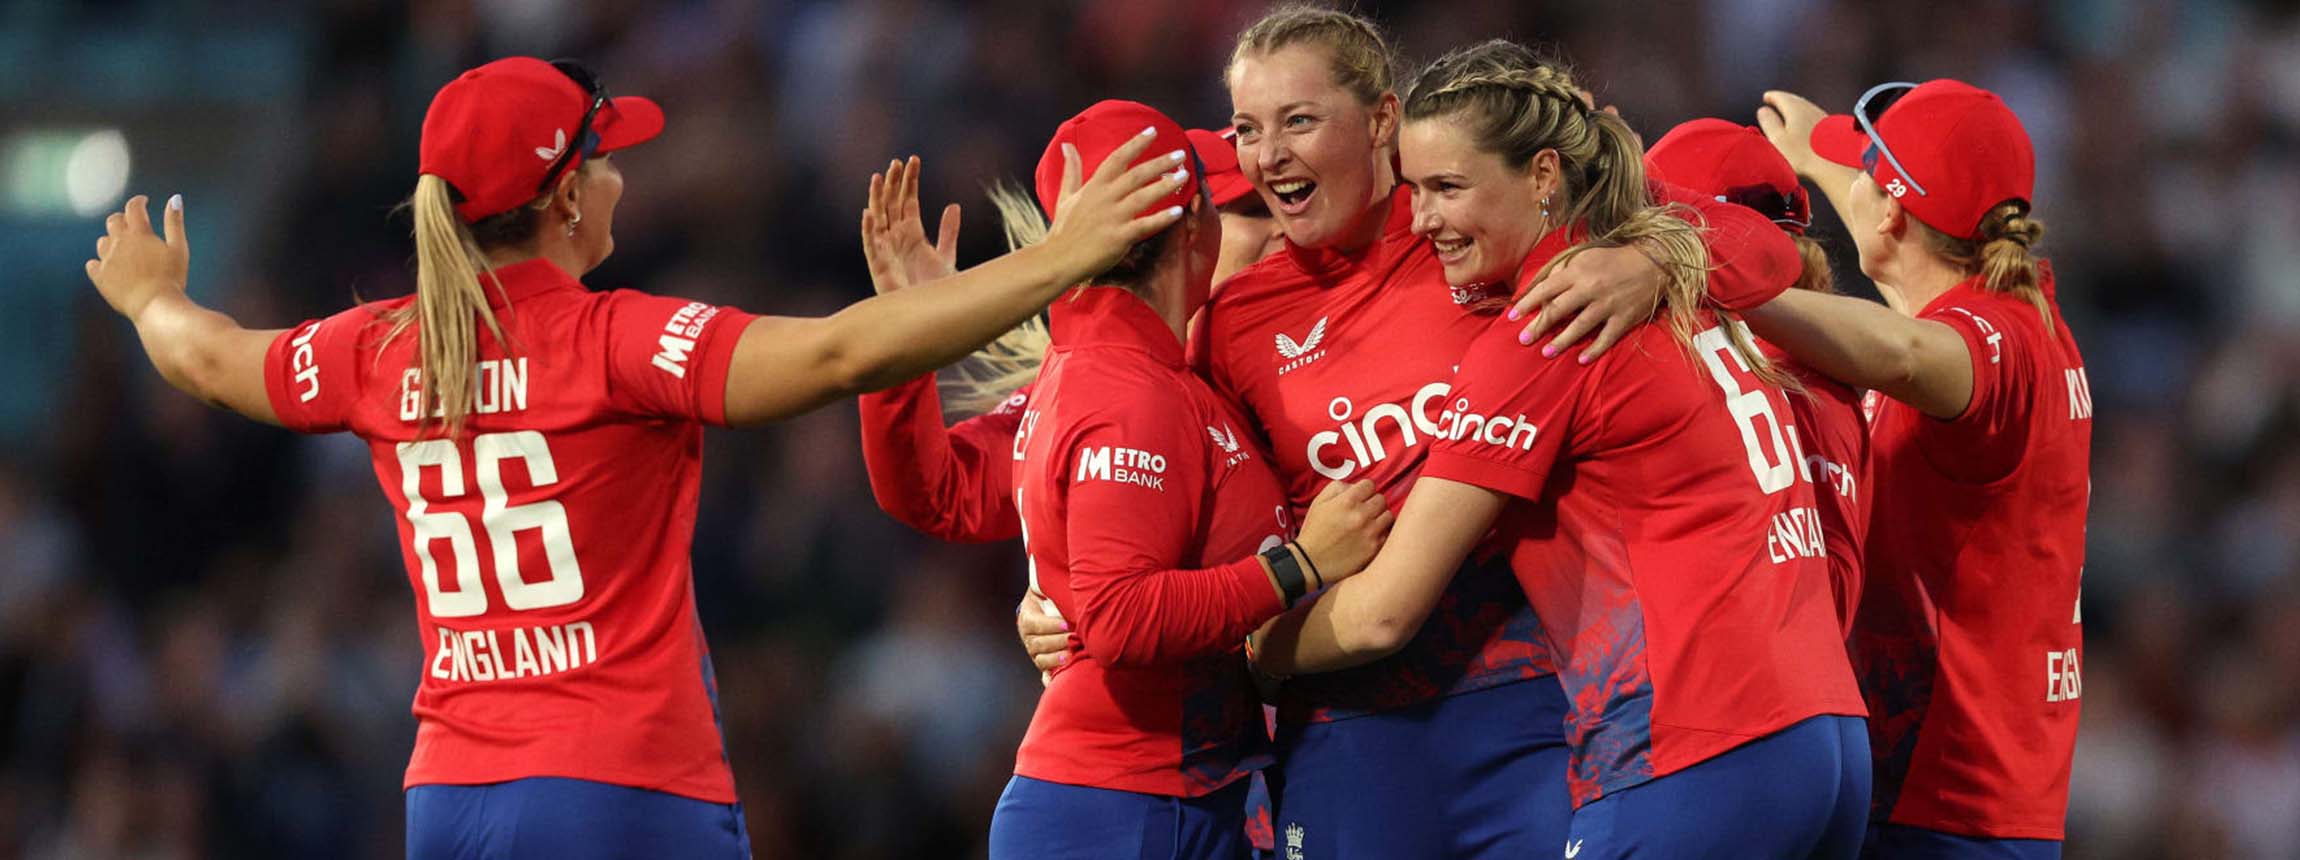 England women celebrate a wicket in front of over 20,000 fans at the kia oval.